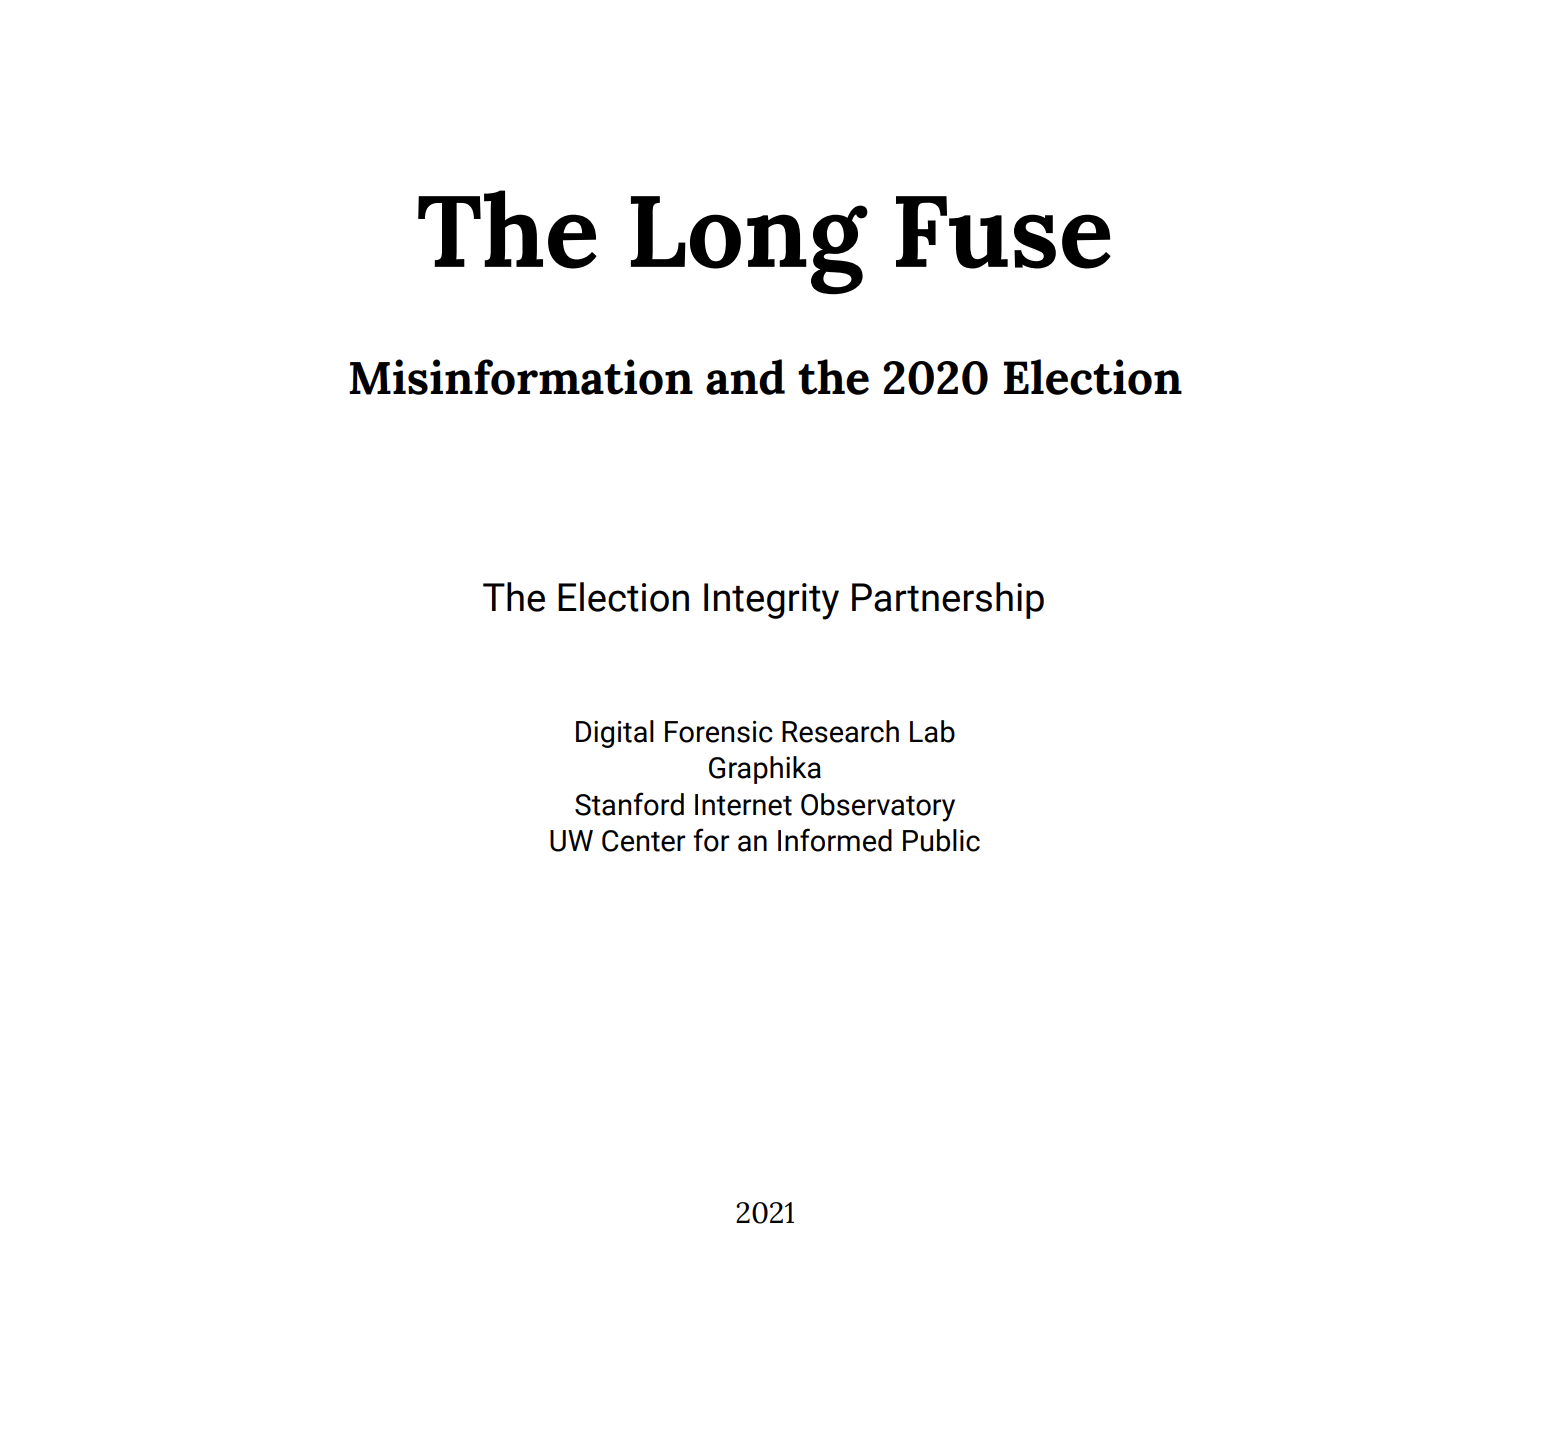 “The Long Fuse: Misinformation and the 2020 Election report”: